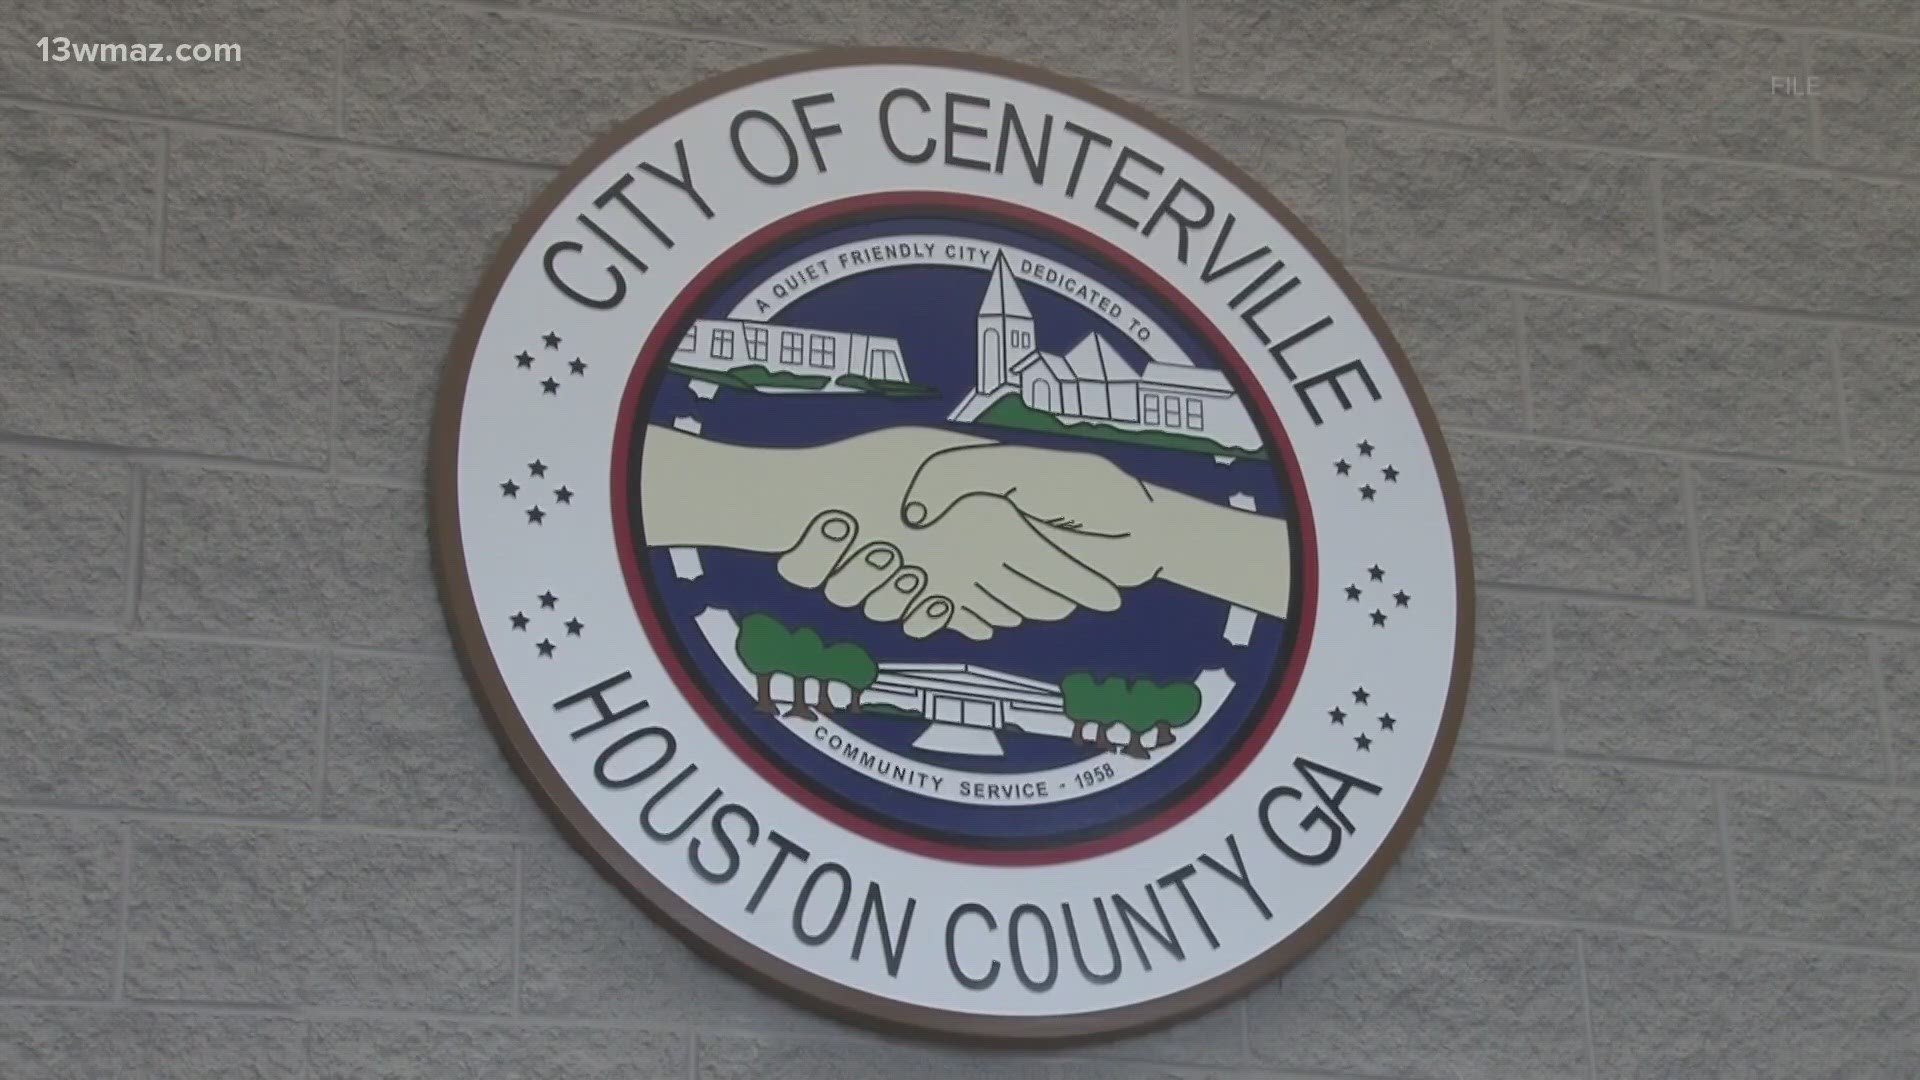 A Centerville councilman is concerned the city's proposed budget could increase property taxes because the budget is about 12 percent larger than years past.